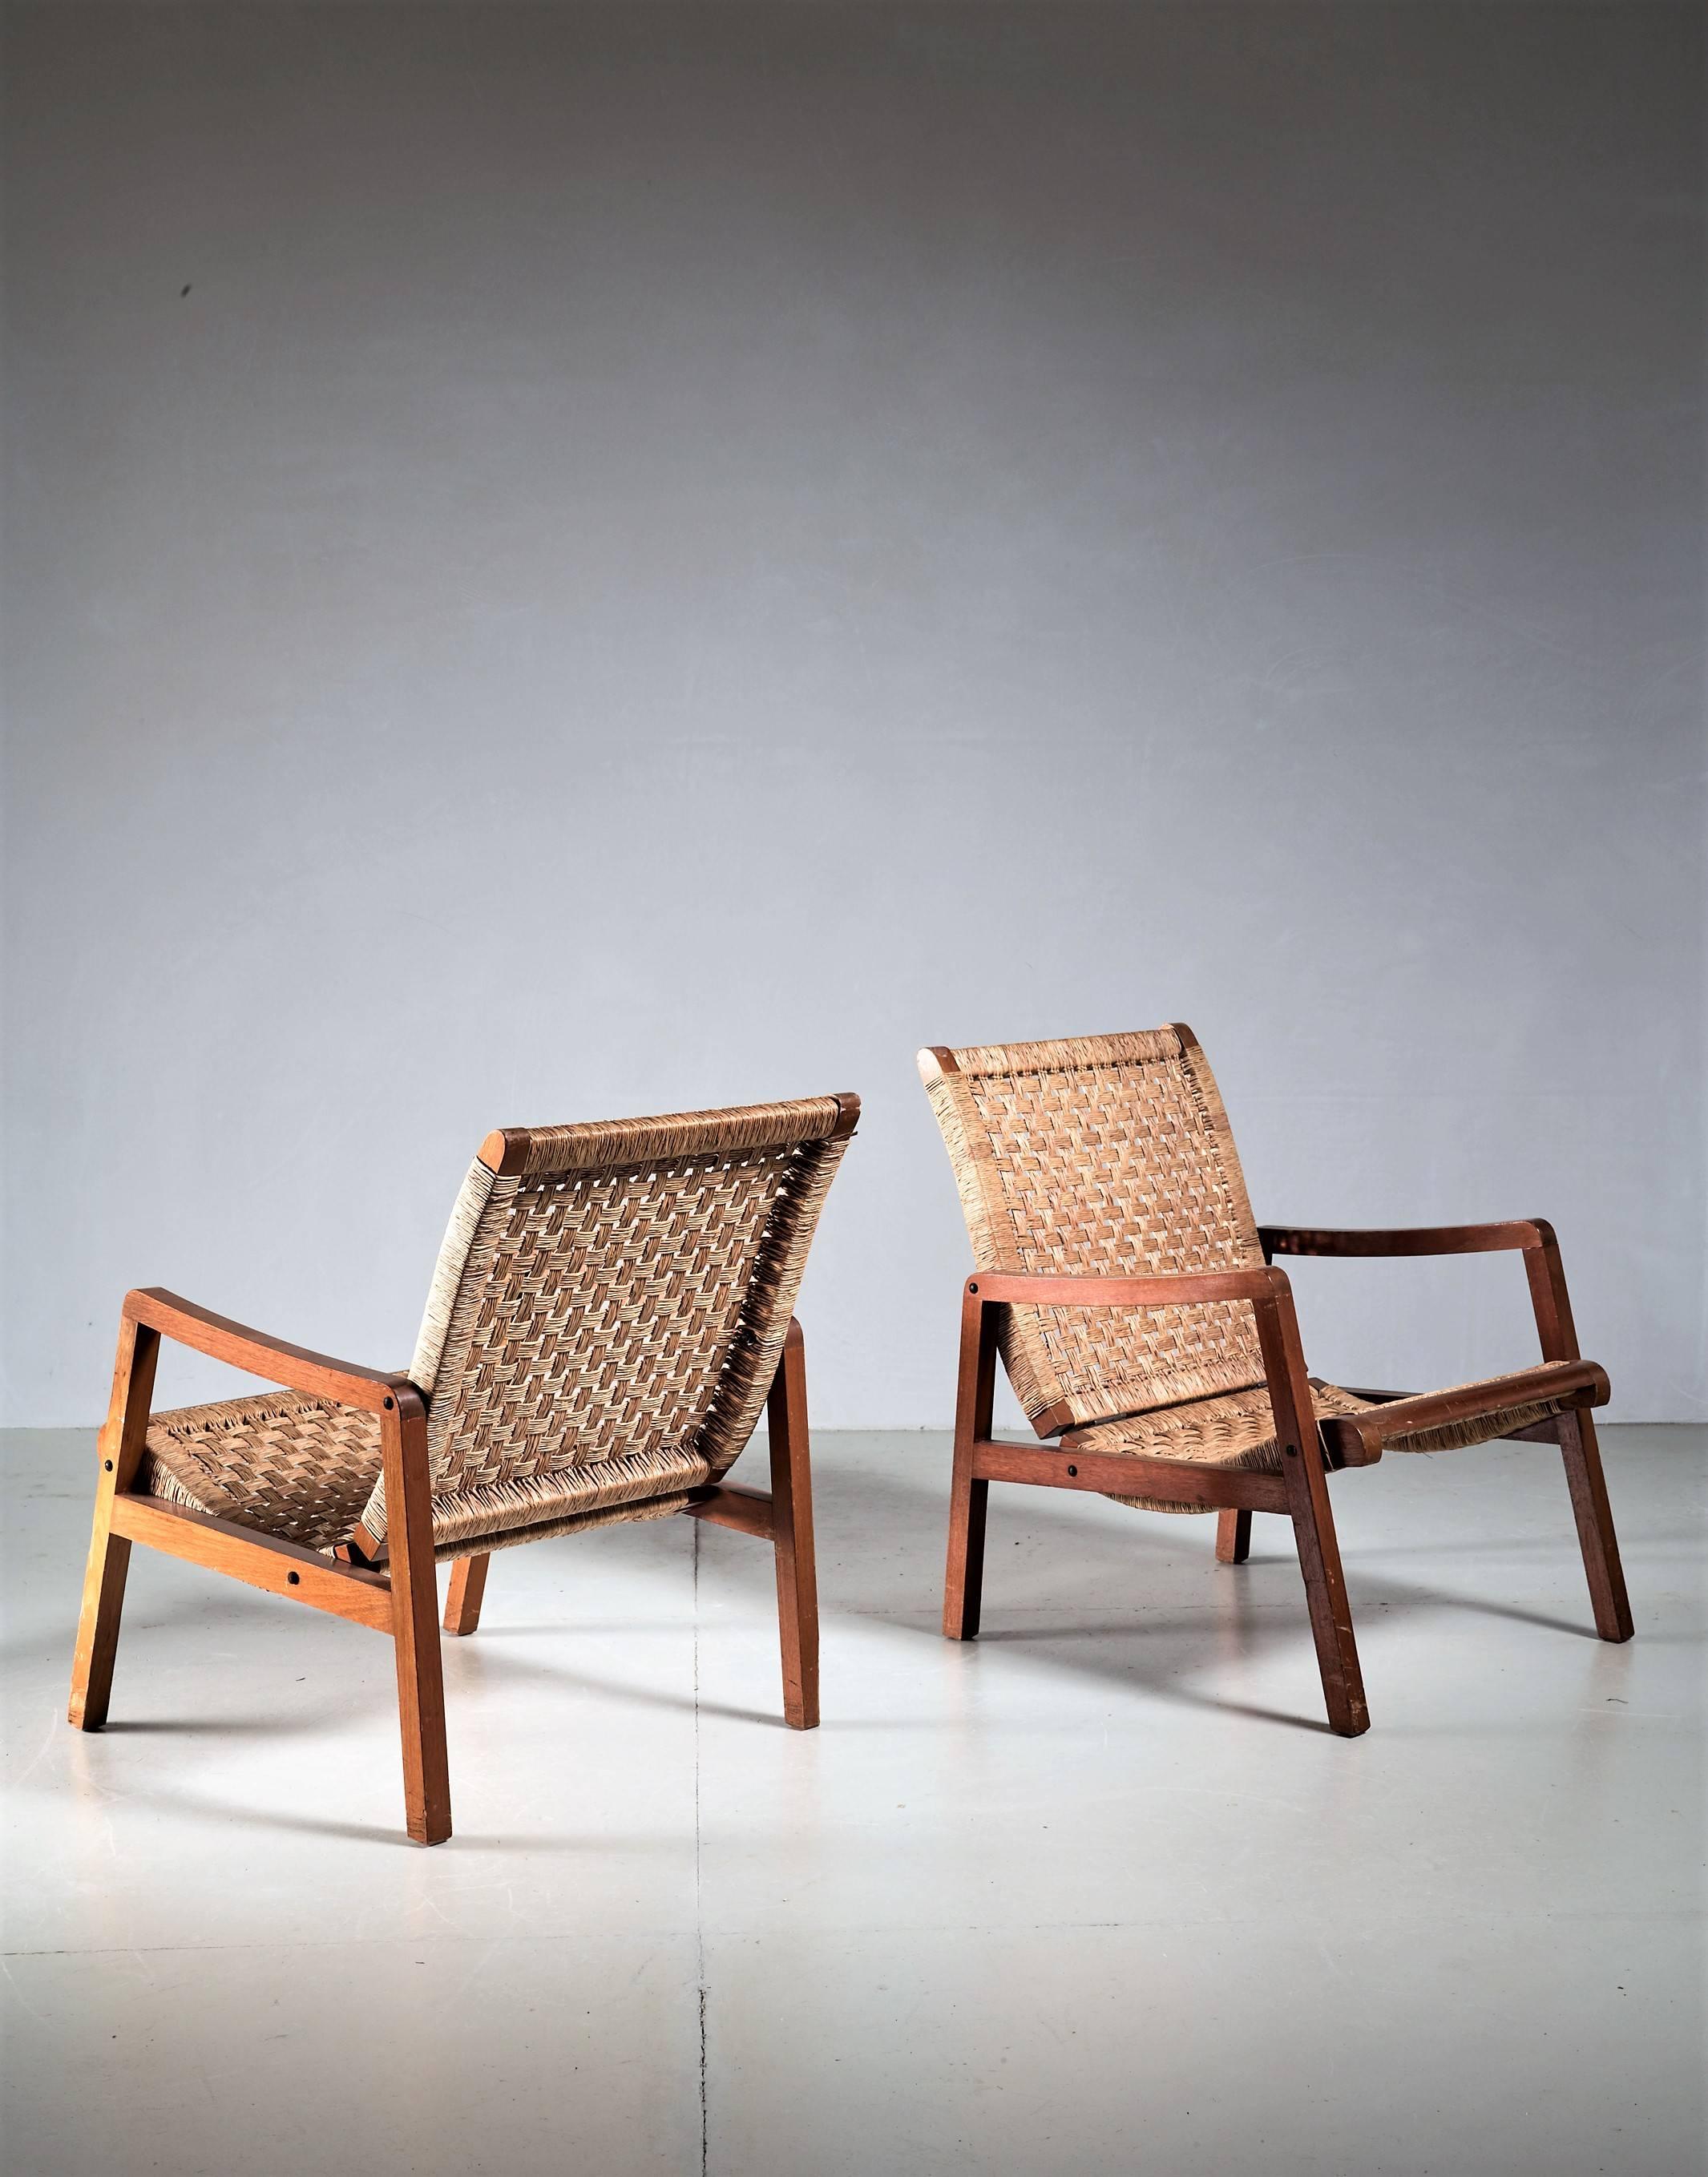 A pair of Mexican armchairs in a style reminiscent of Michael van Beuren and Domus. The chairs are made of a slender wooden frame and a curved seating with a woven cane upholstery.